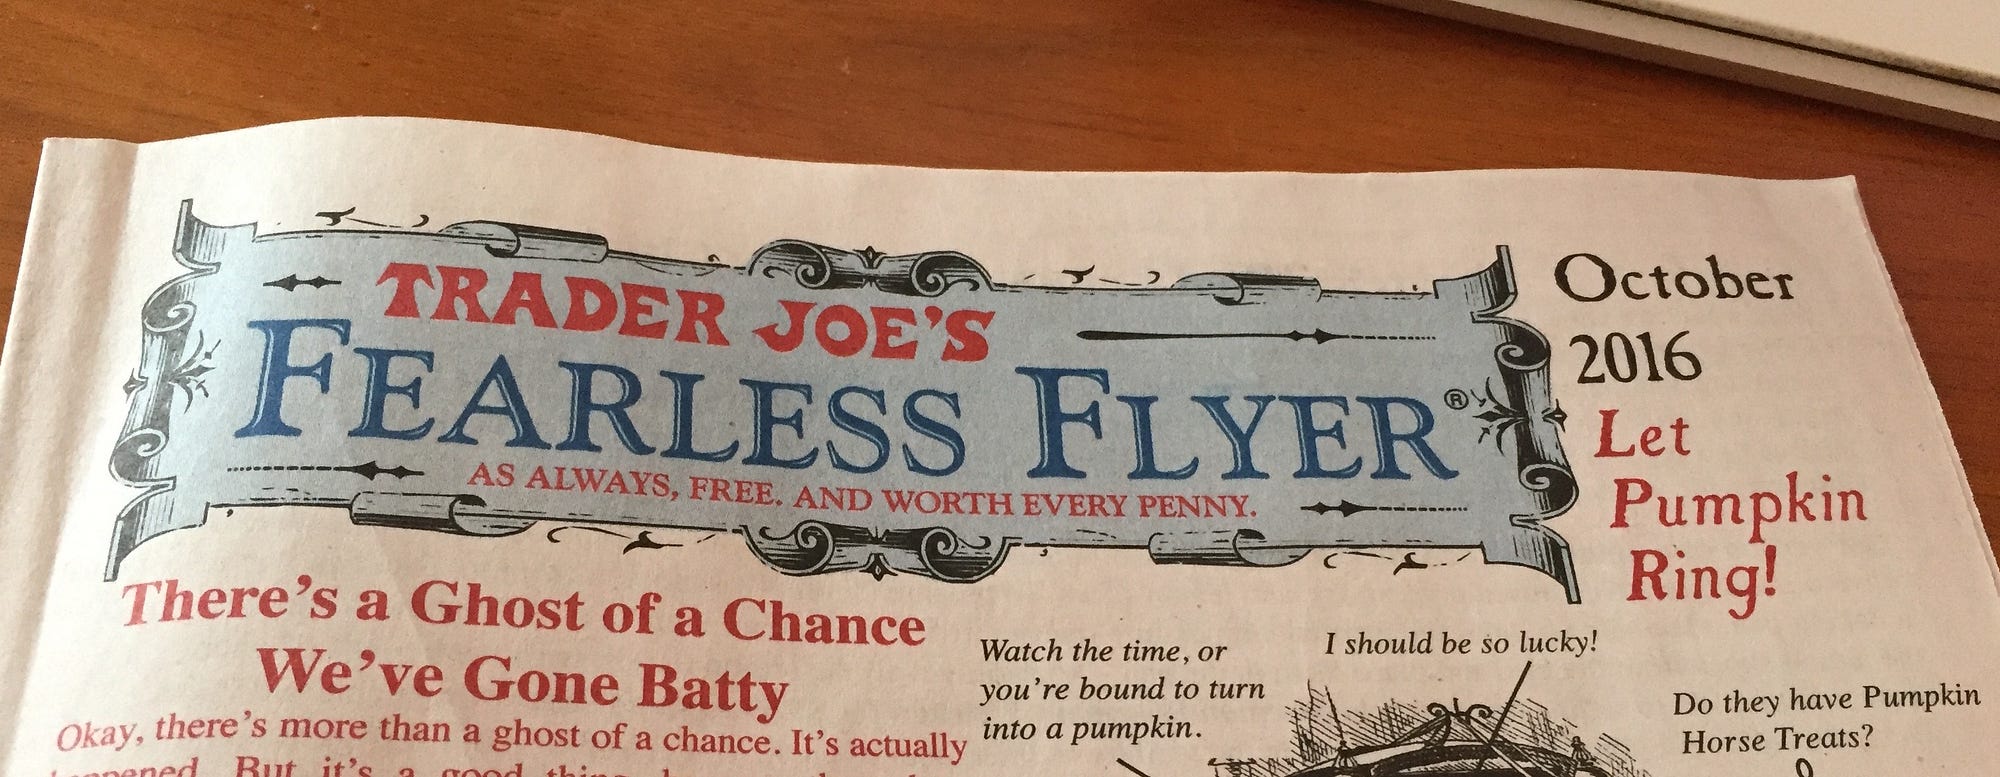 Another Close Reading of Trader Joe’s “Fearless Flyer”